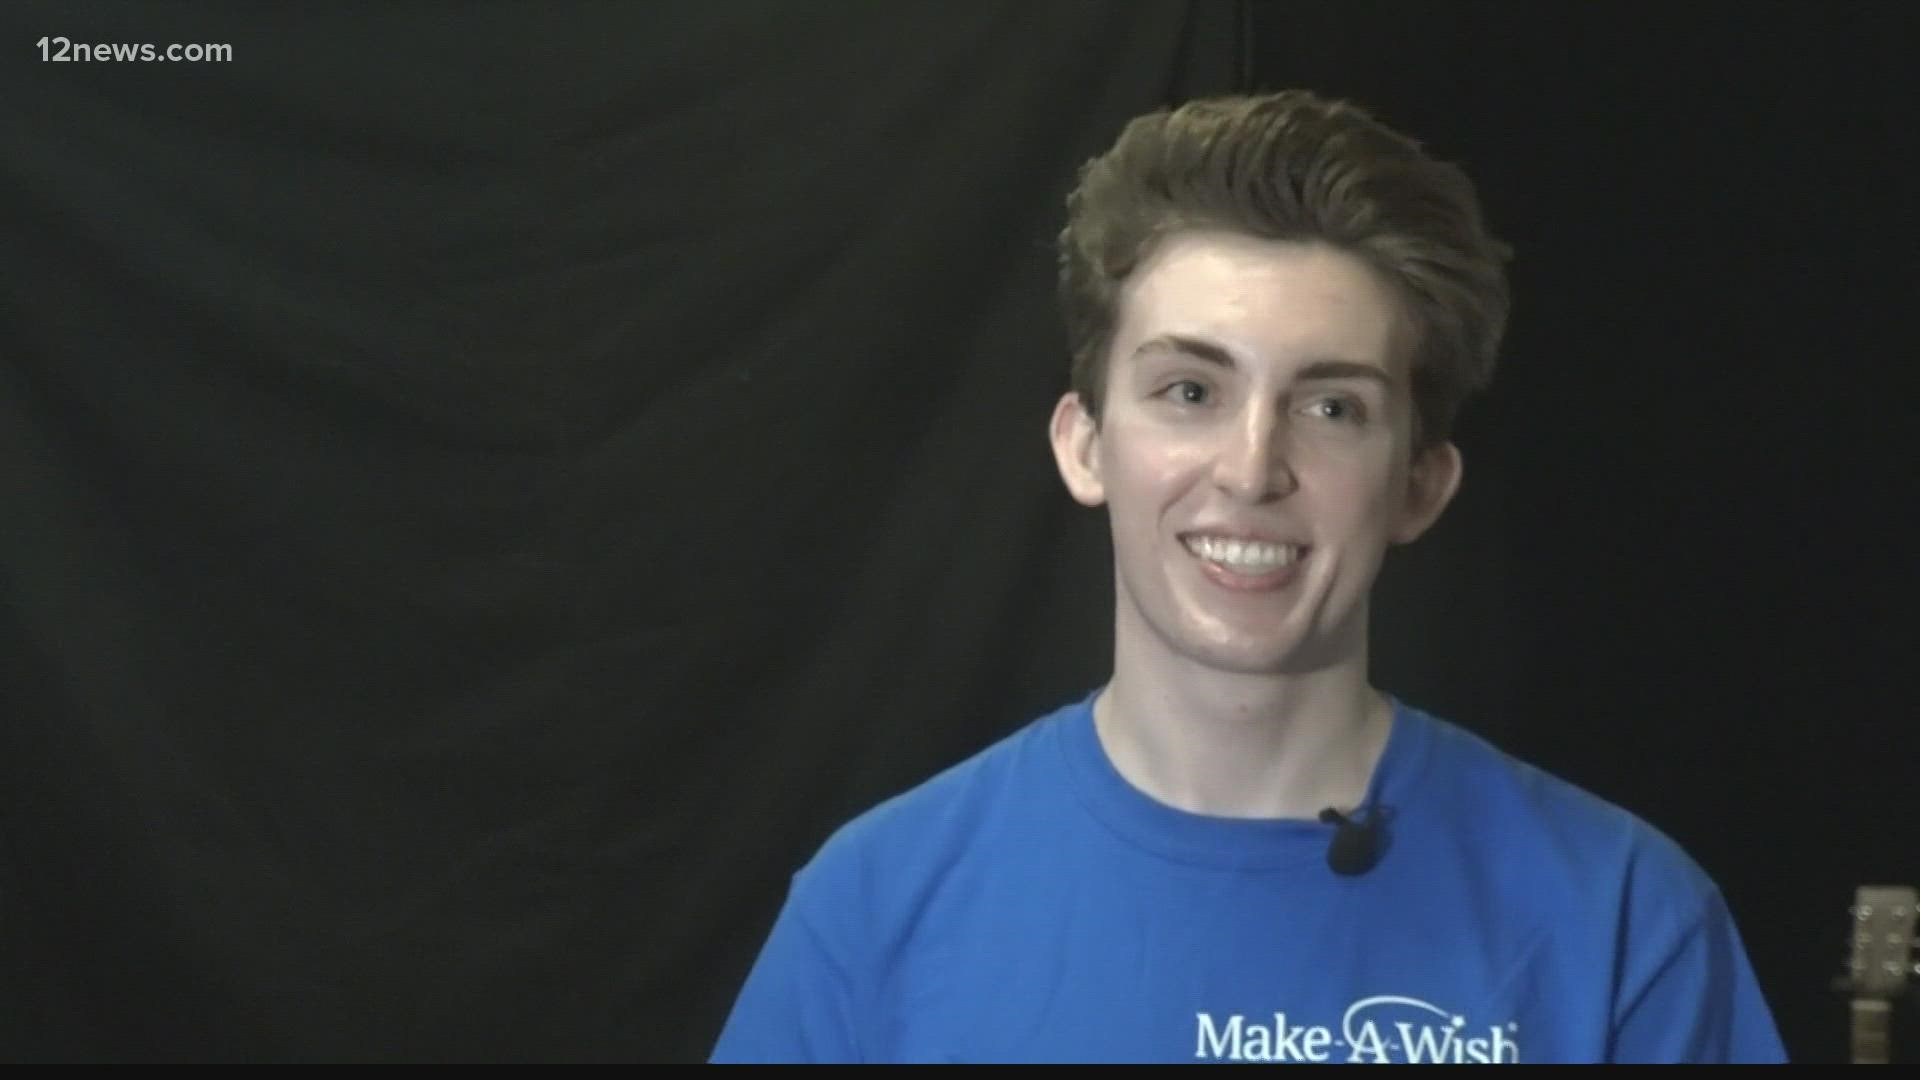 Make-A-Wish Arizona and Sneaky Big Studios teamed up to make 20-year-old Sean Dean's dreams come true.